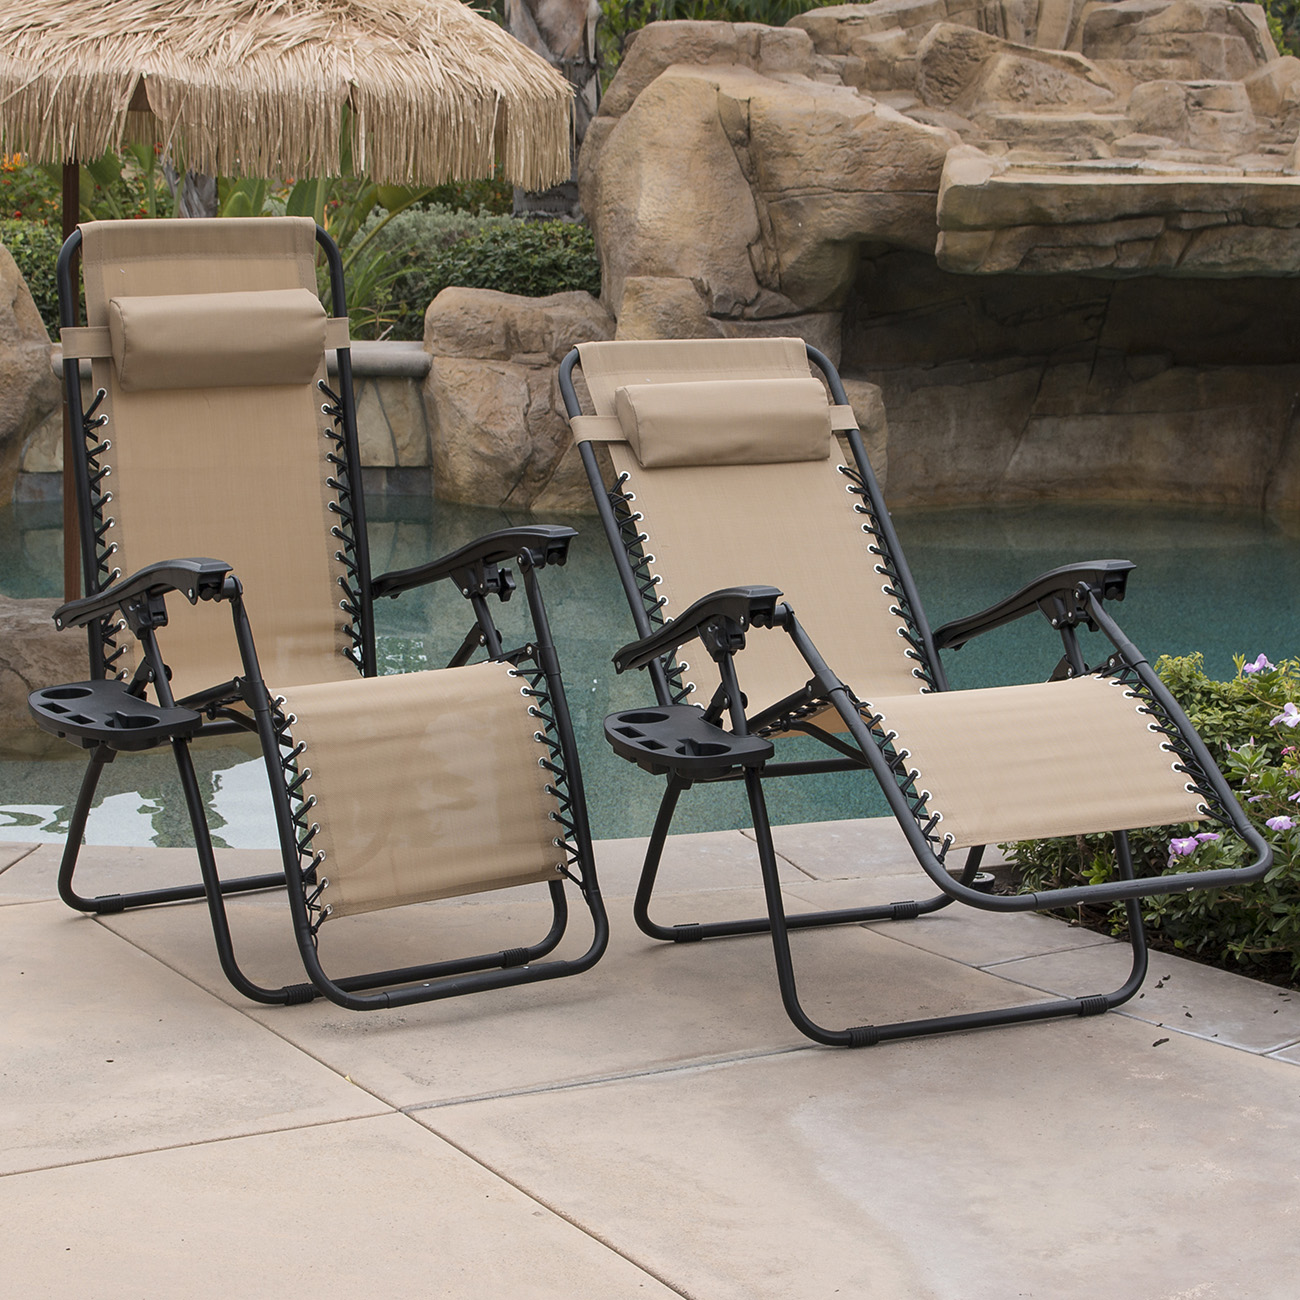 Brief Overview About The Folding Patio Chairs